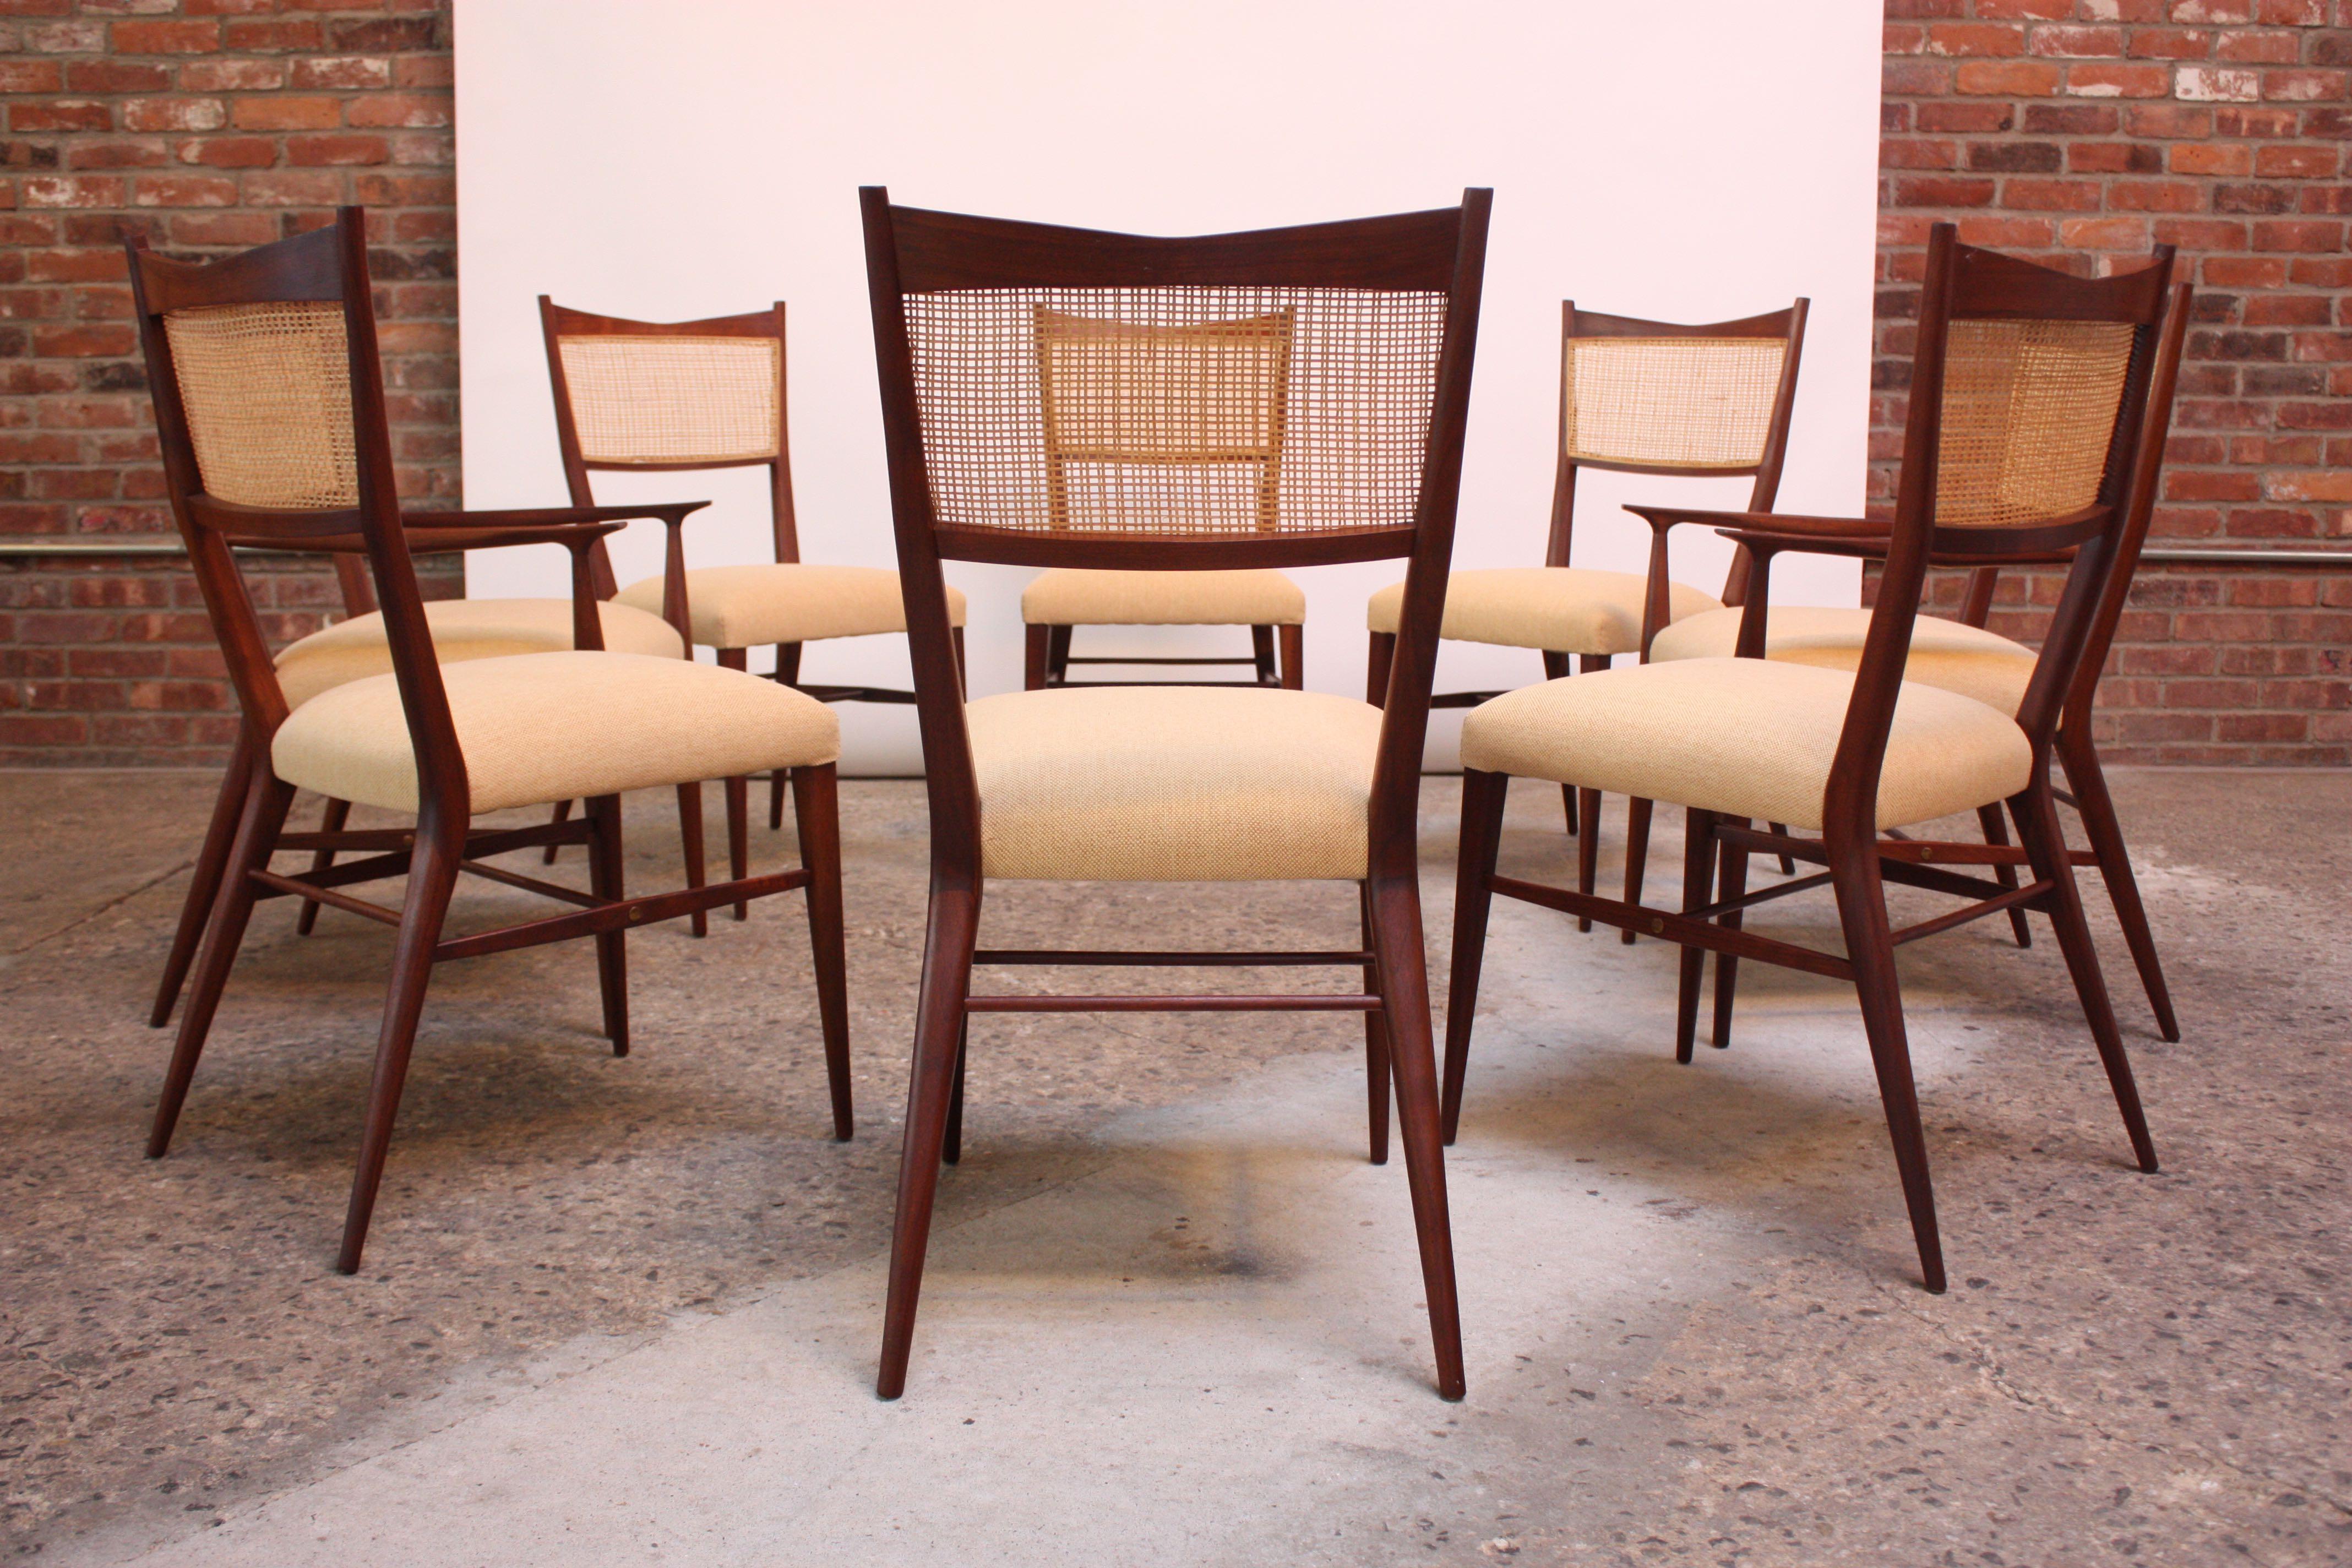 Set of eight (two arm and six side) Paul Mccobb Directional dining chairs produced by H. Sacks & Sons of Boston, MA for their Connoisseur collection in 1956 (model number 7001 side chairs and 7009 arm chairs). Stained mahogany sculptural frames with